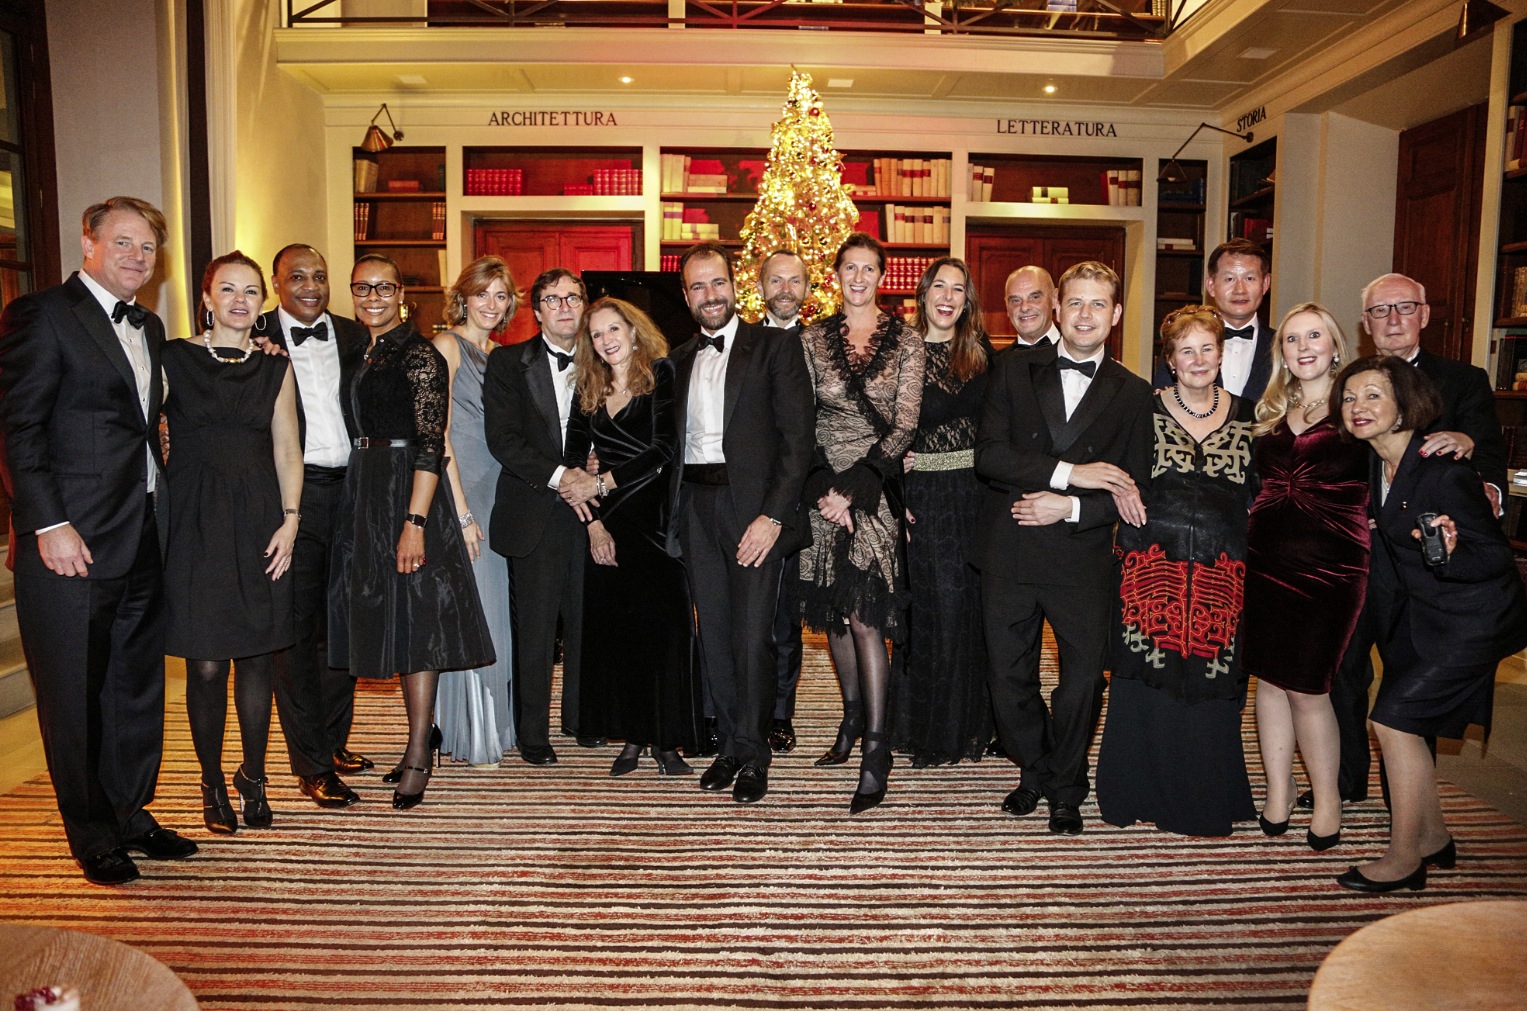 The members of Palazzo Tornabuoni at the Christmas party